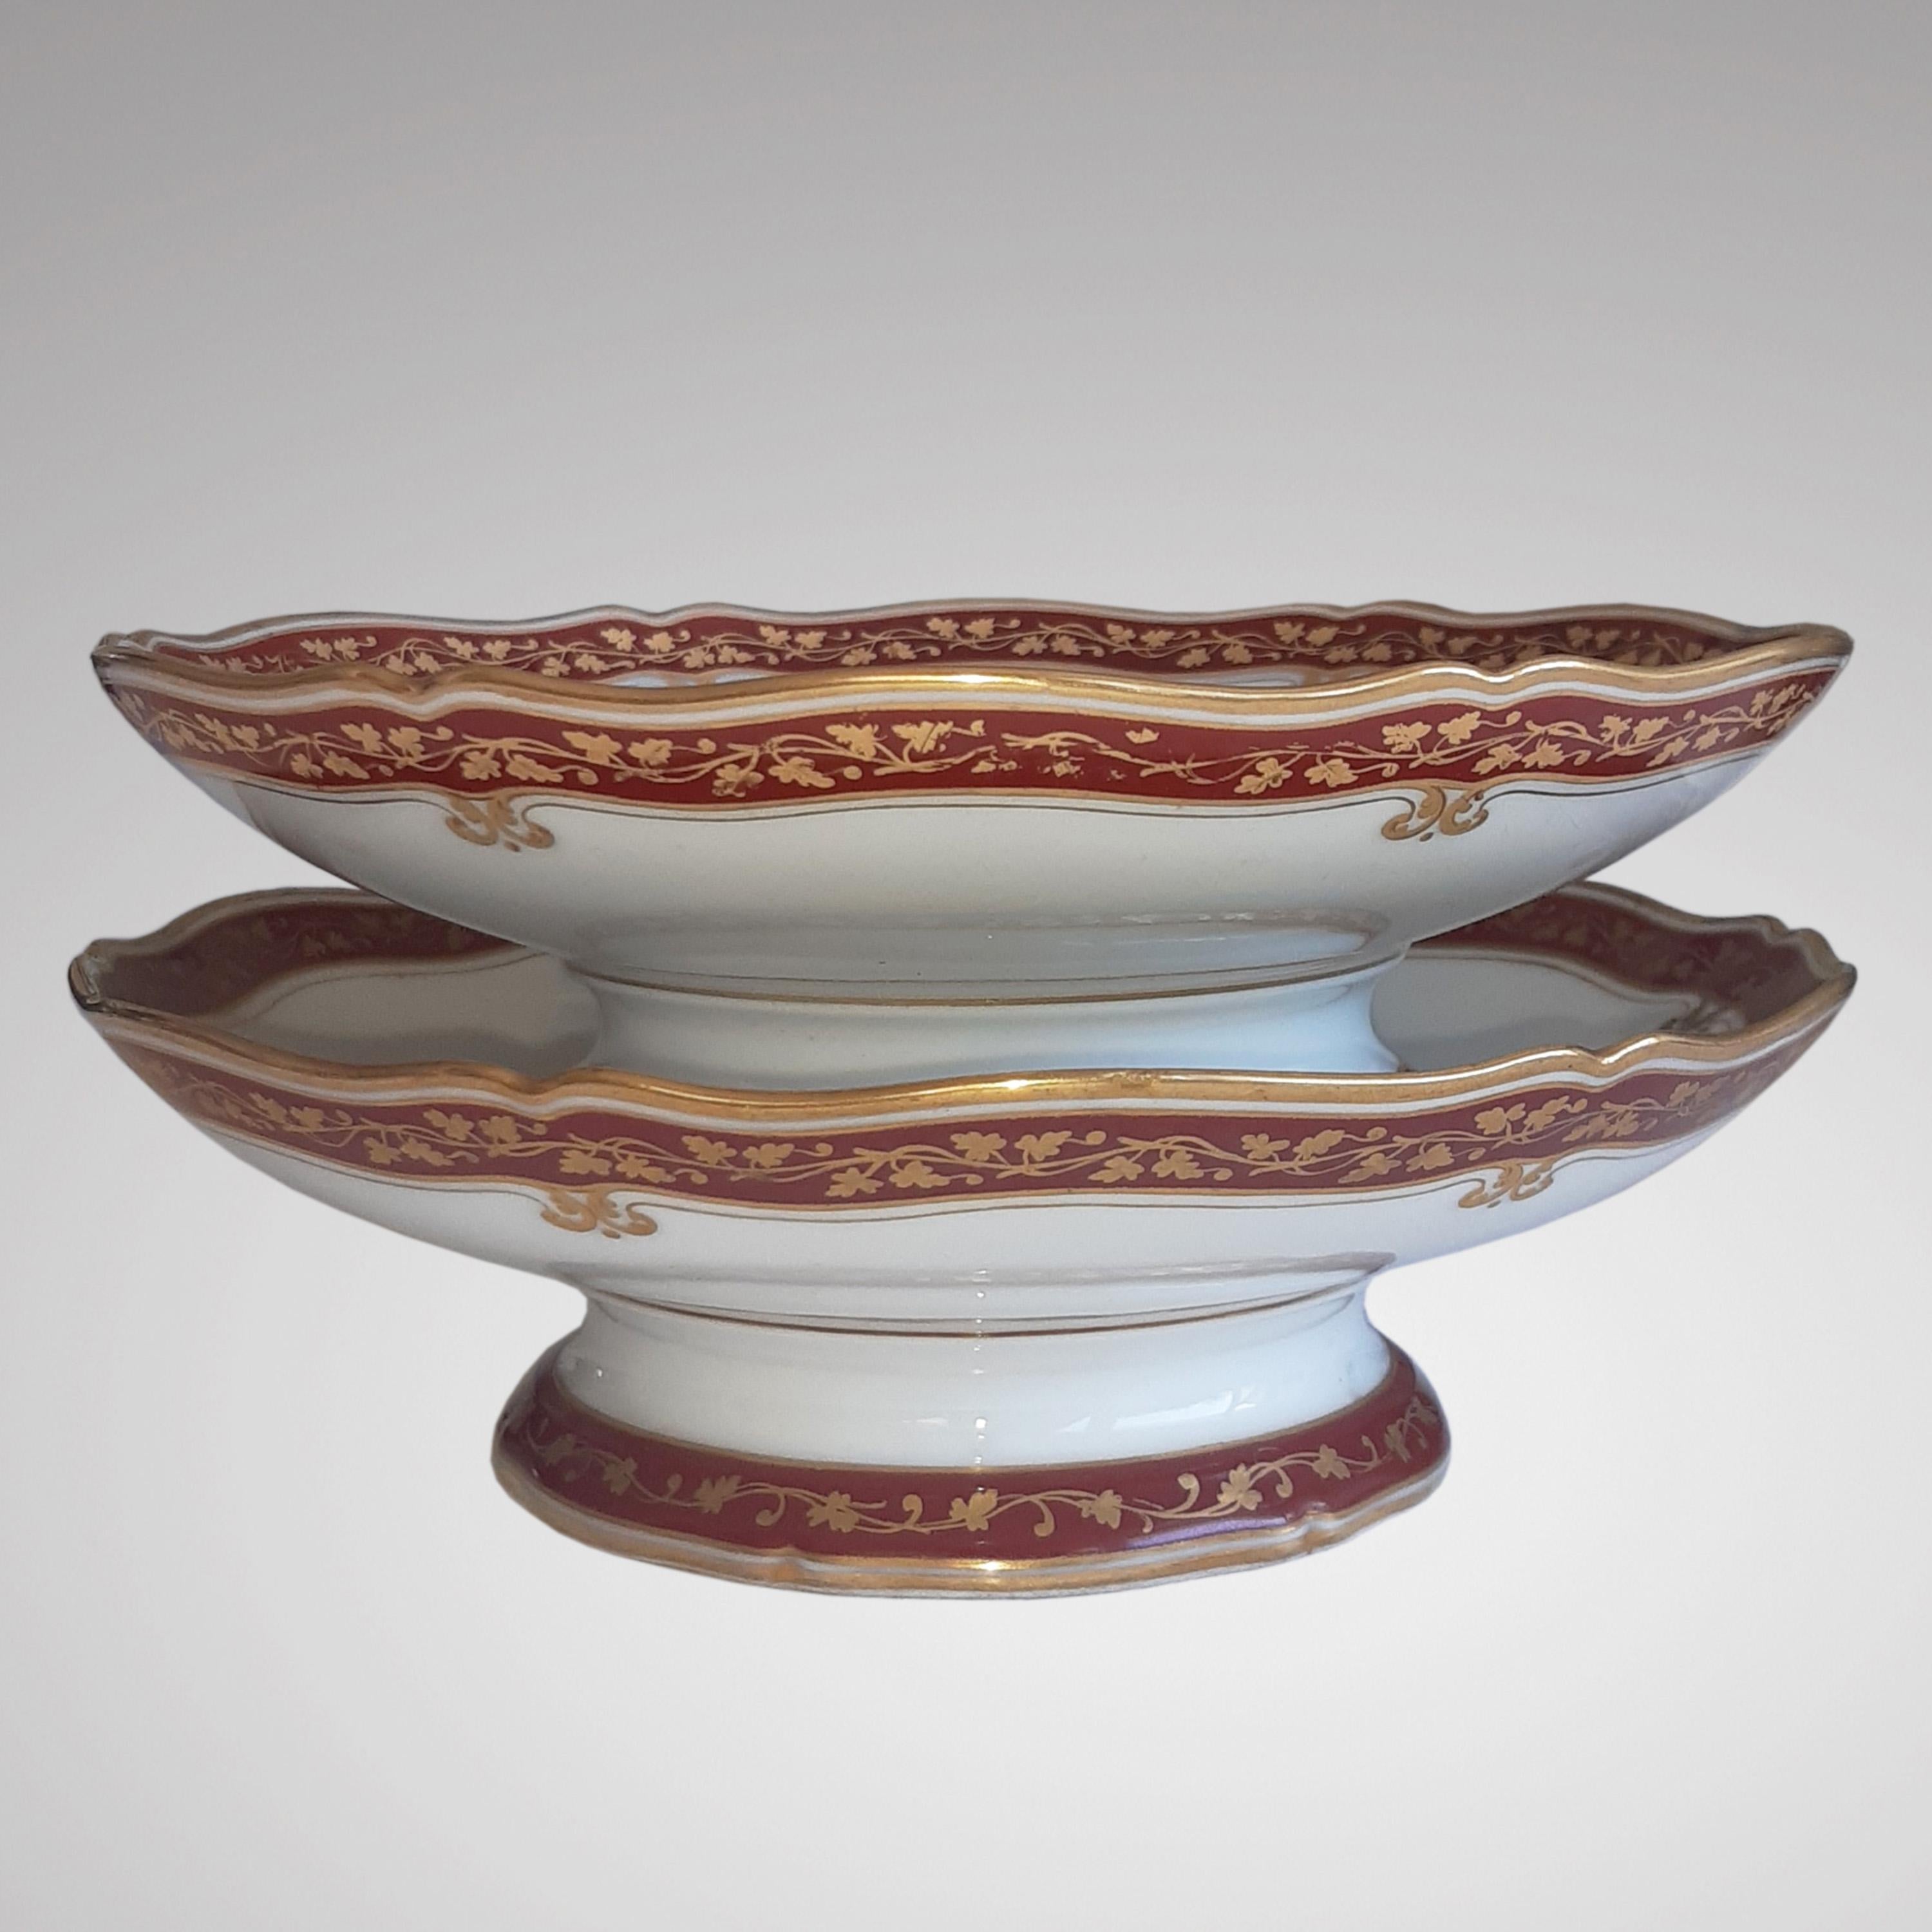 Late 19th Century Dessert Service with Red Plates in Paris Porcelain, Napoleon III Period french For Sale